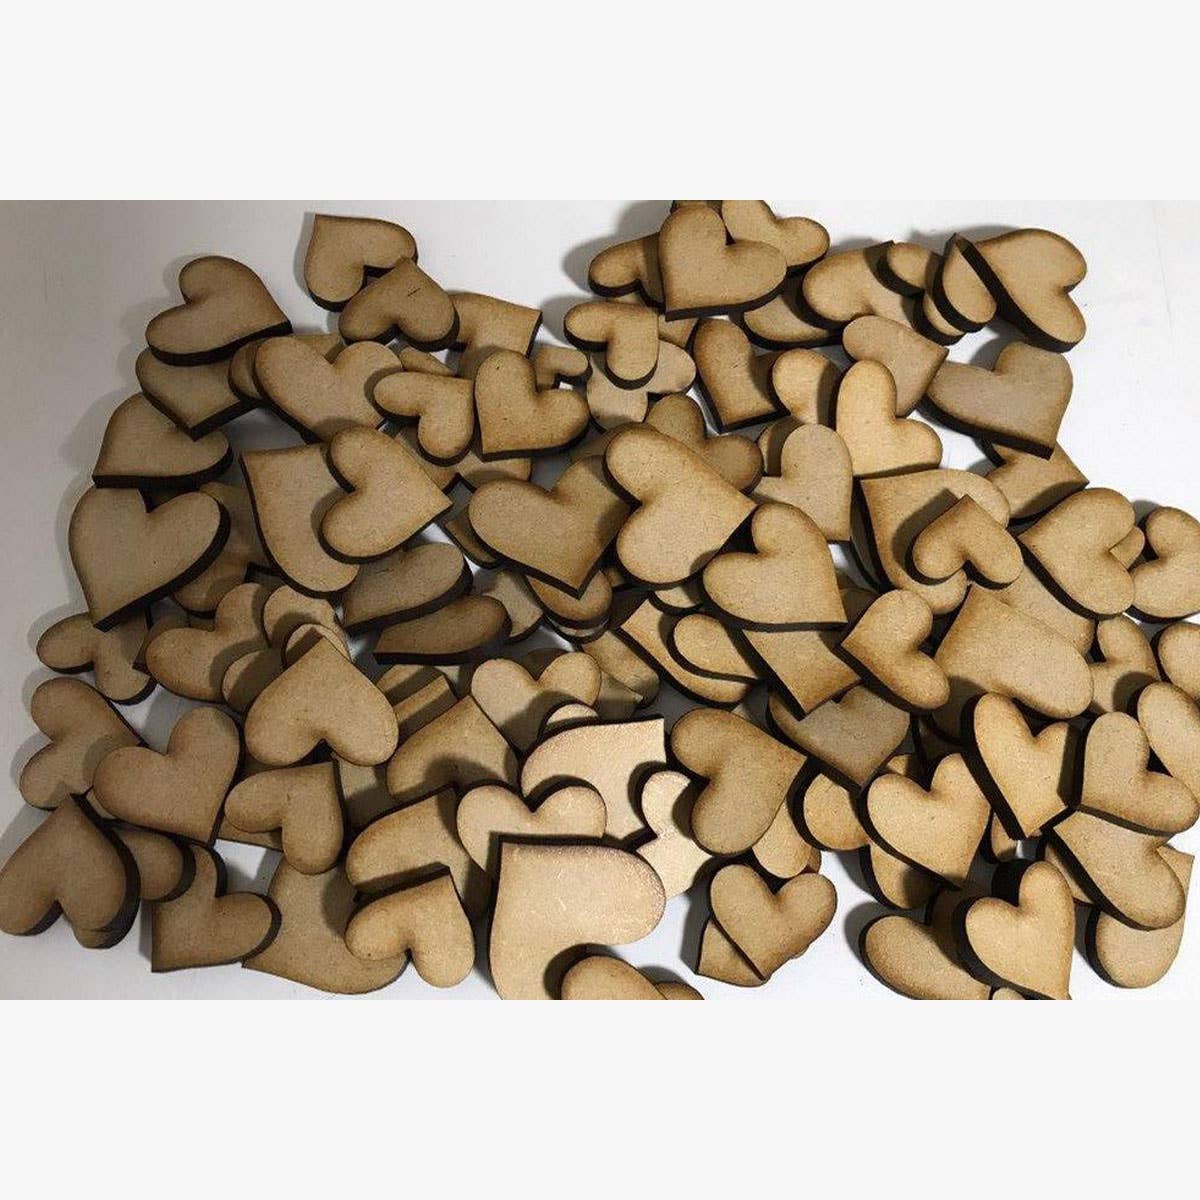 Box of 150 Wooden Hearts - Mixed Sizes